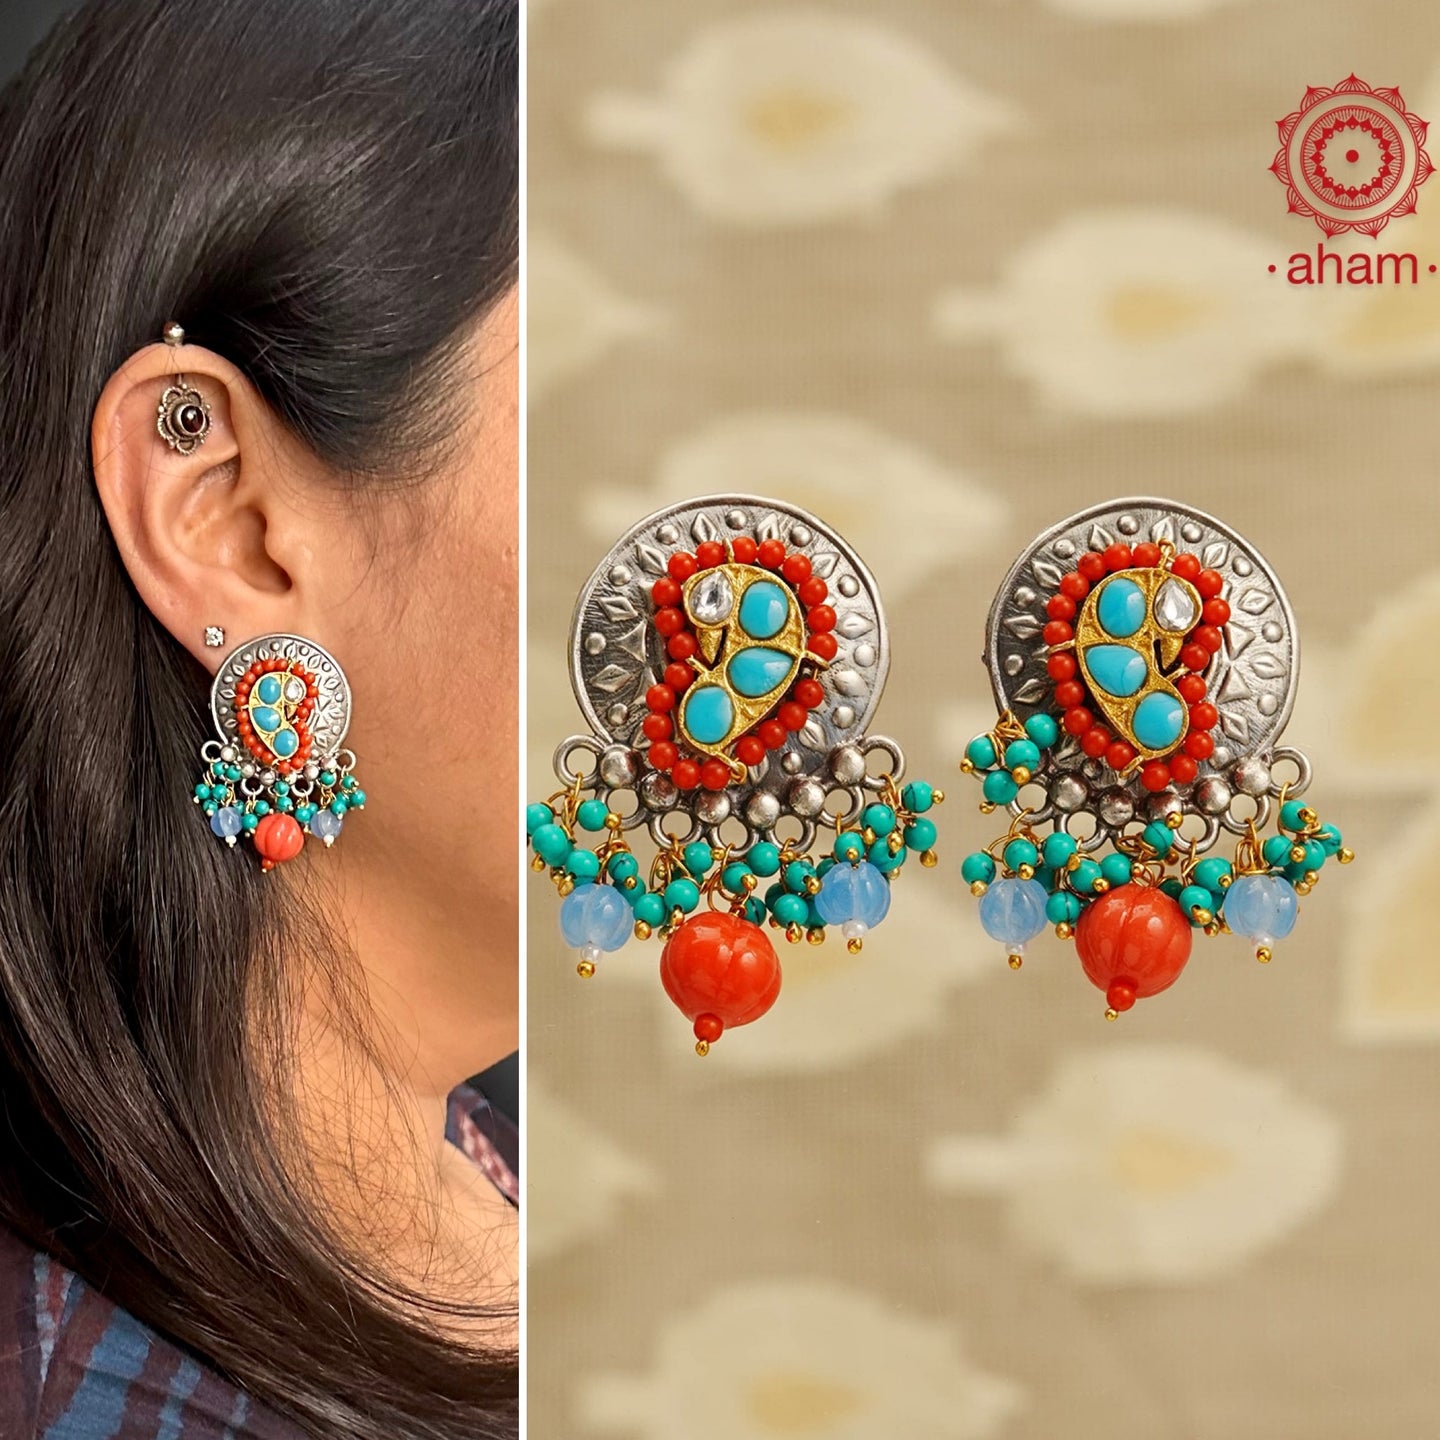 Noori two tone earrings in 92.5 sterling silver. Handcrafted earrings with beautiful semi precious stones. Style this up with your favourite ethnic or fusion outfit.